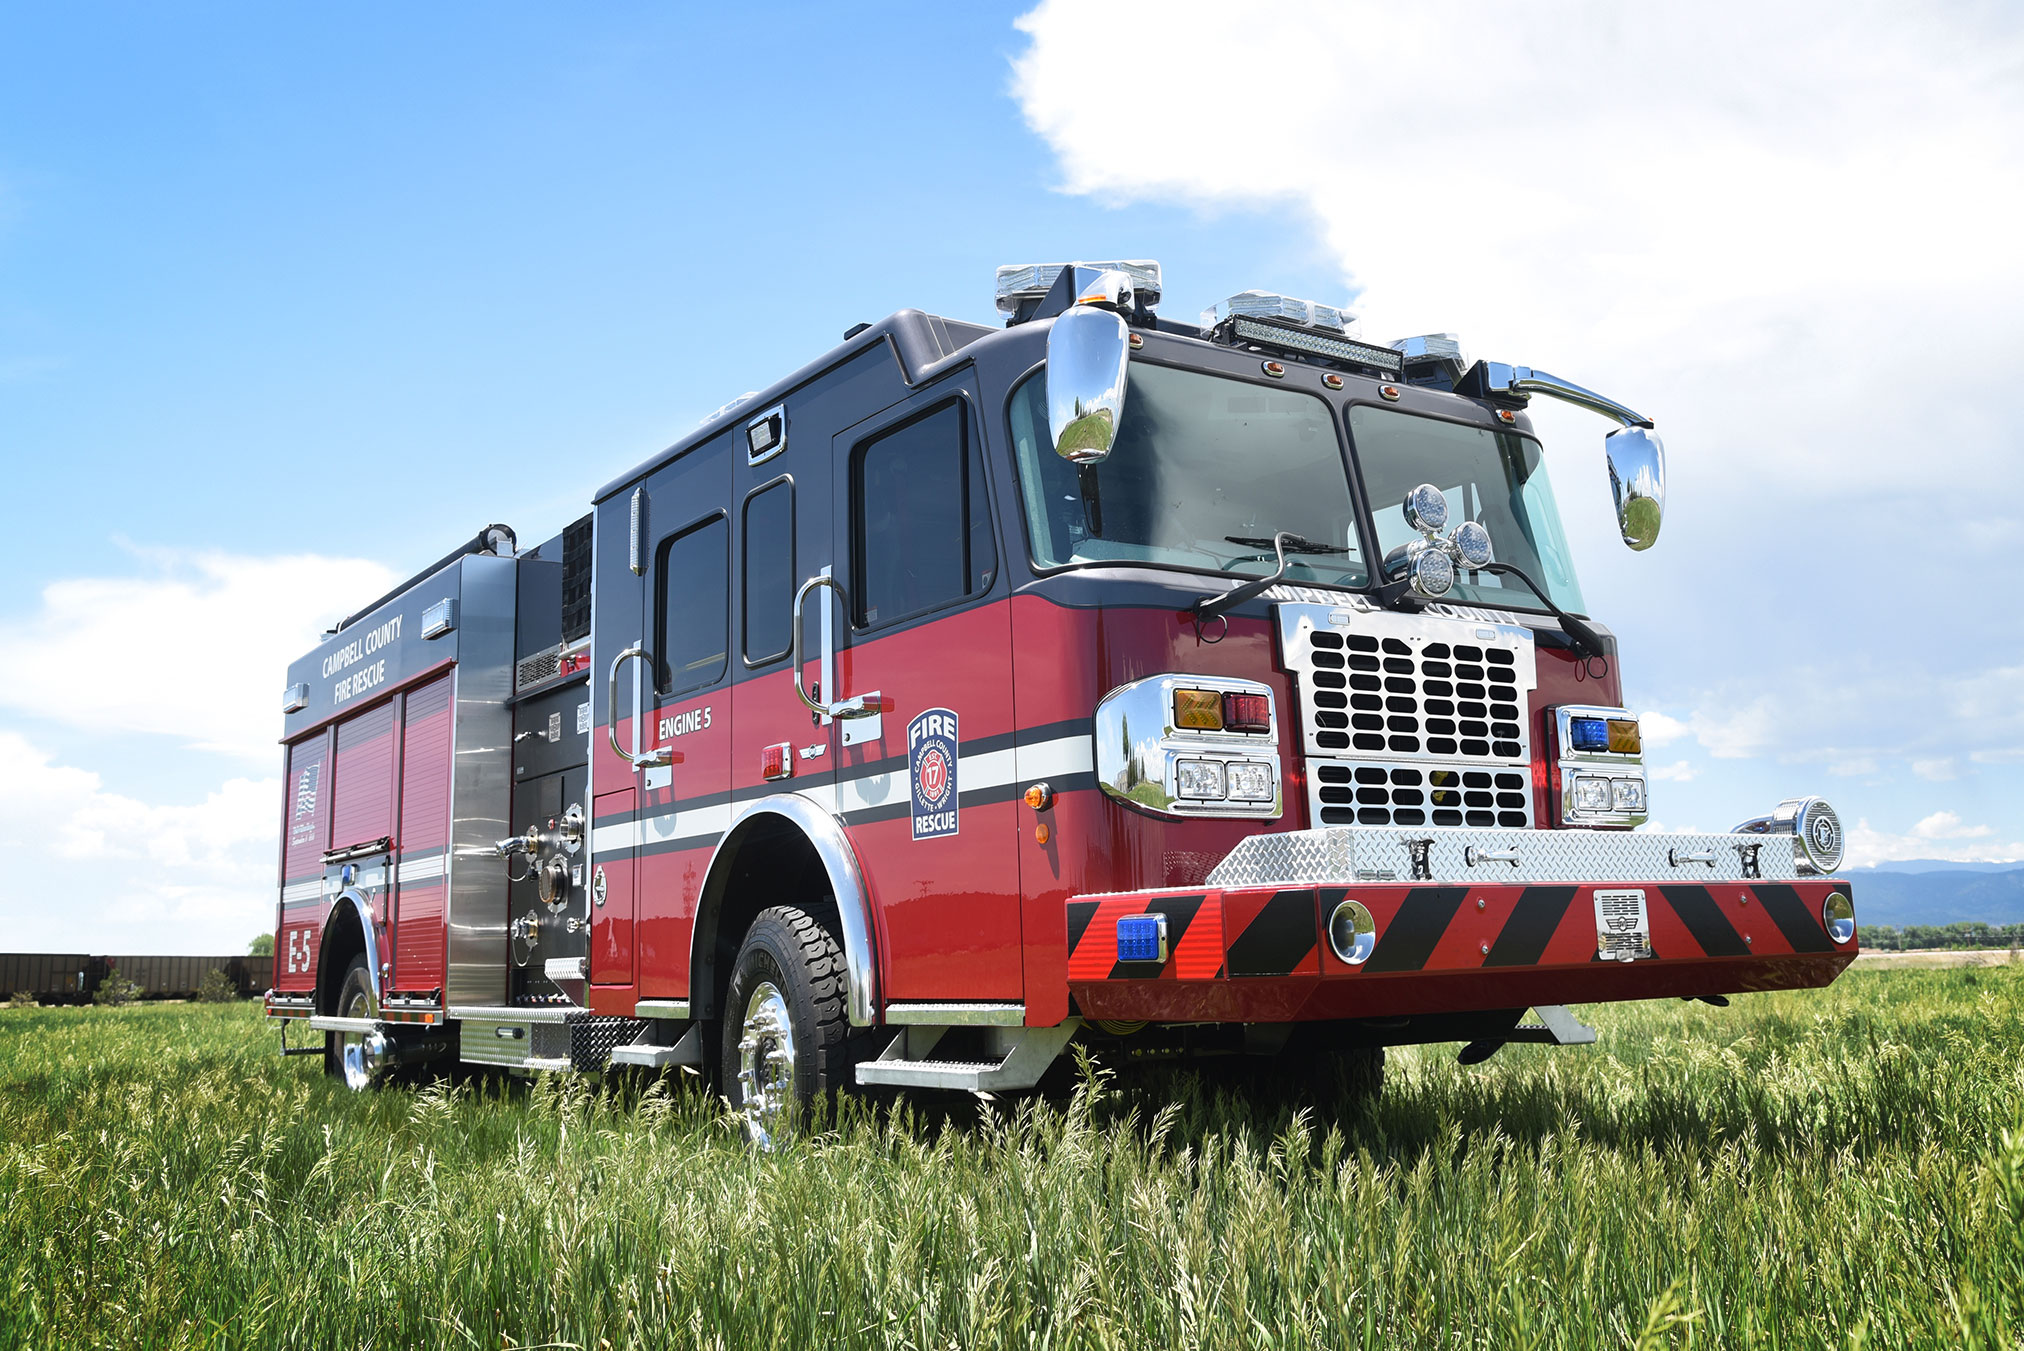 Featured image for “Campbell County, WY Rescue Pumper #1123”